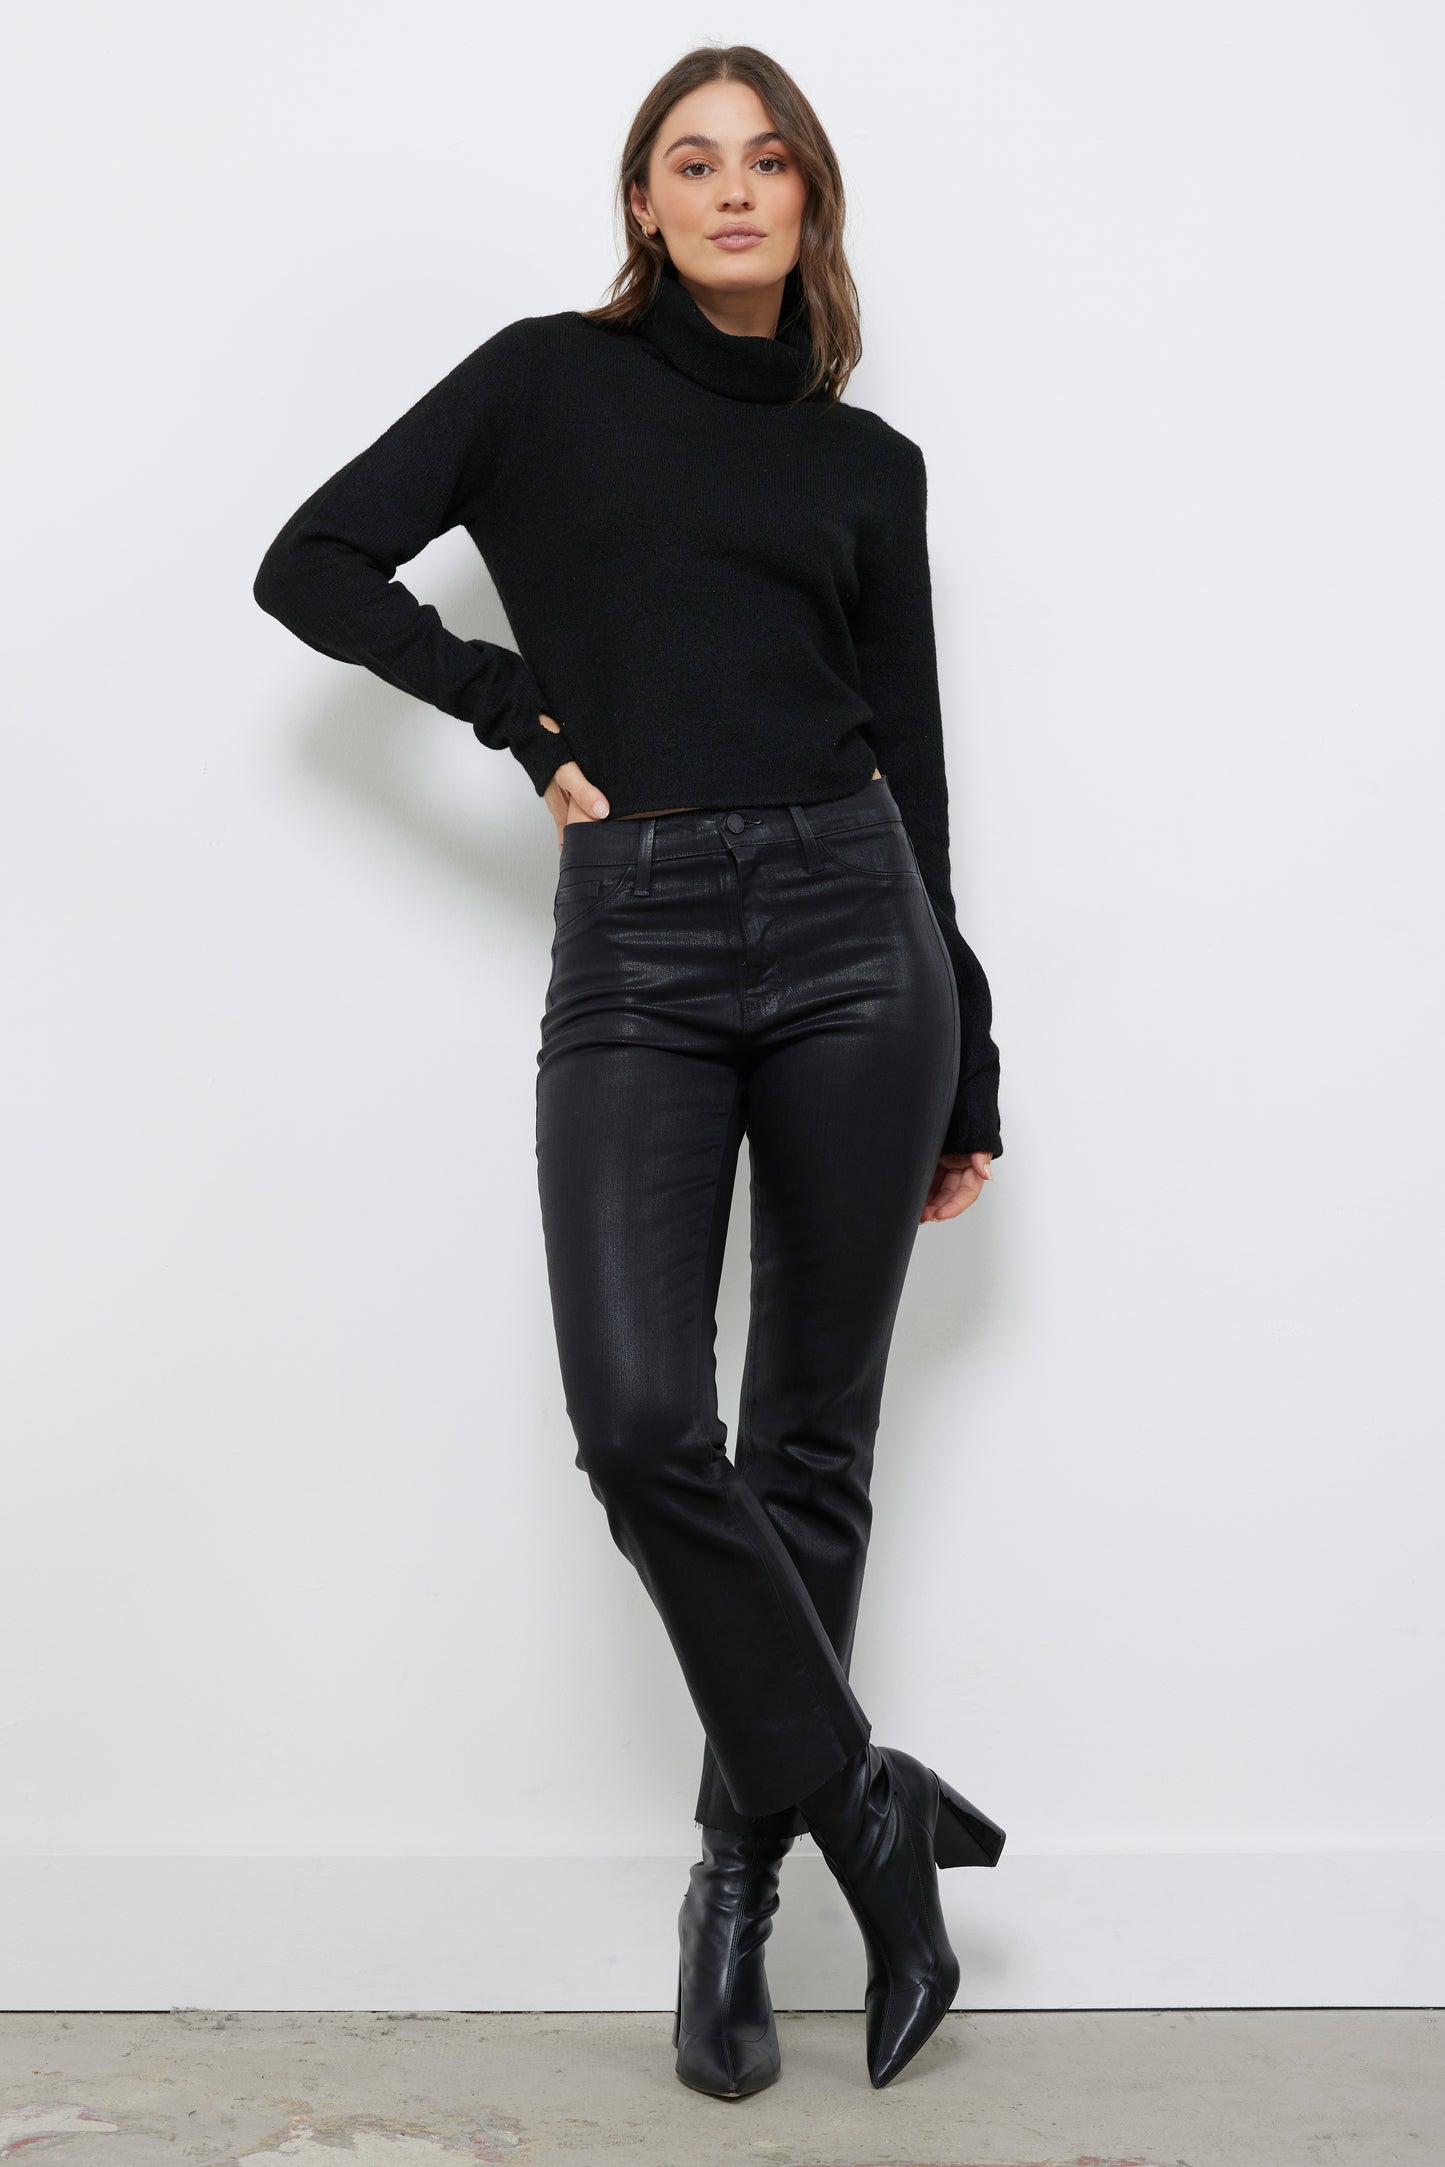 Girls Day Out Black Knit Top